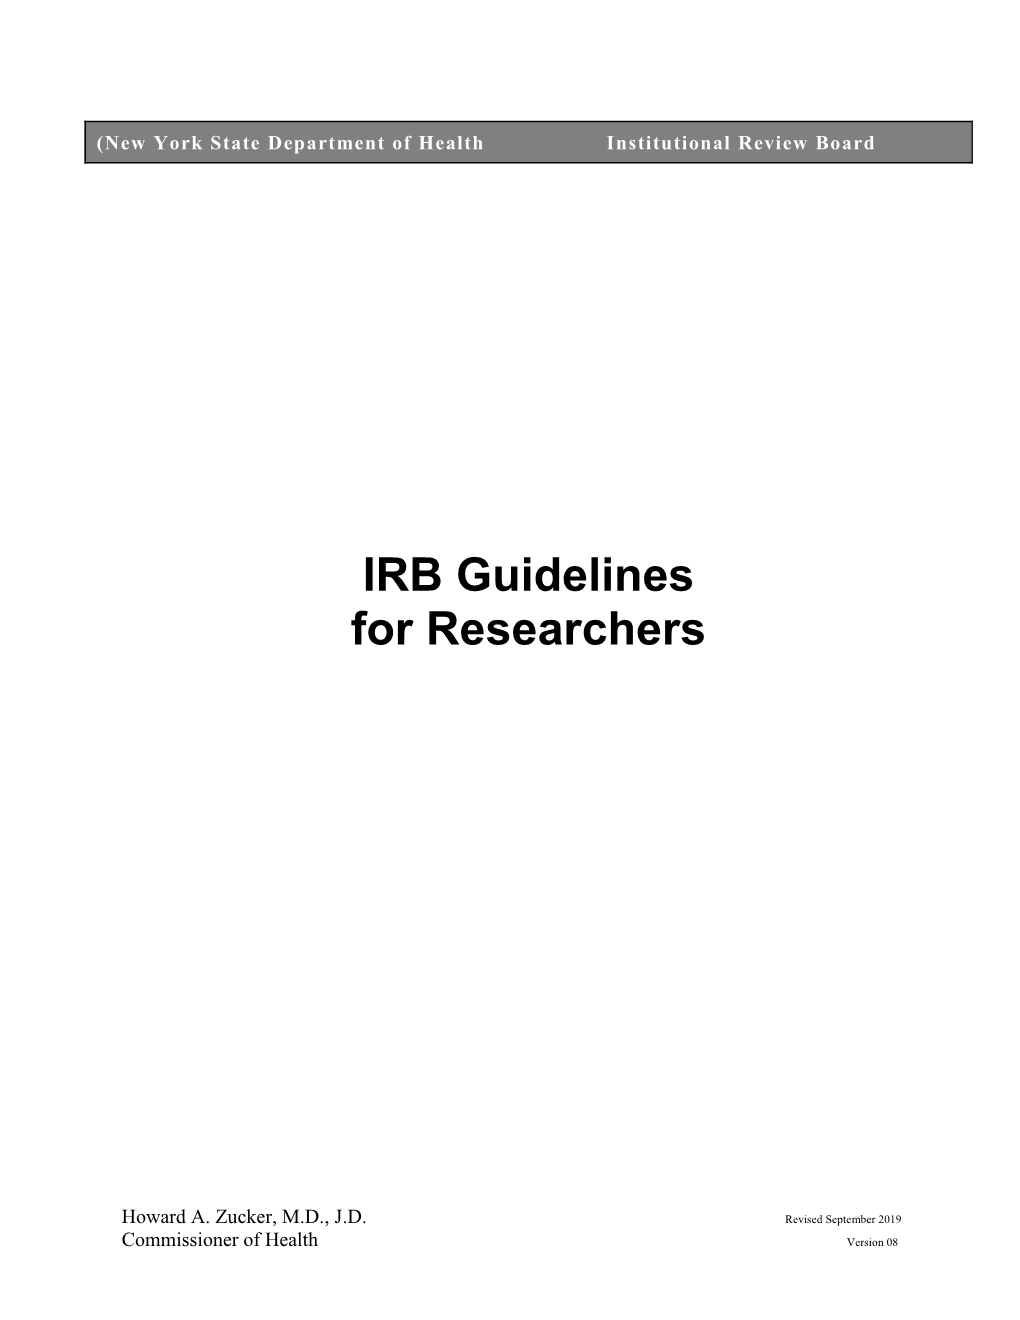 IRB Guidelines for Researchers